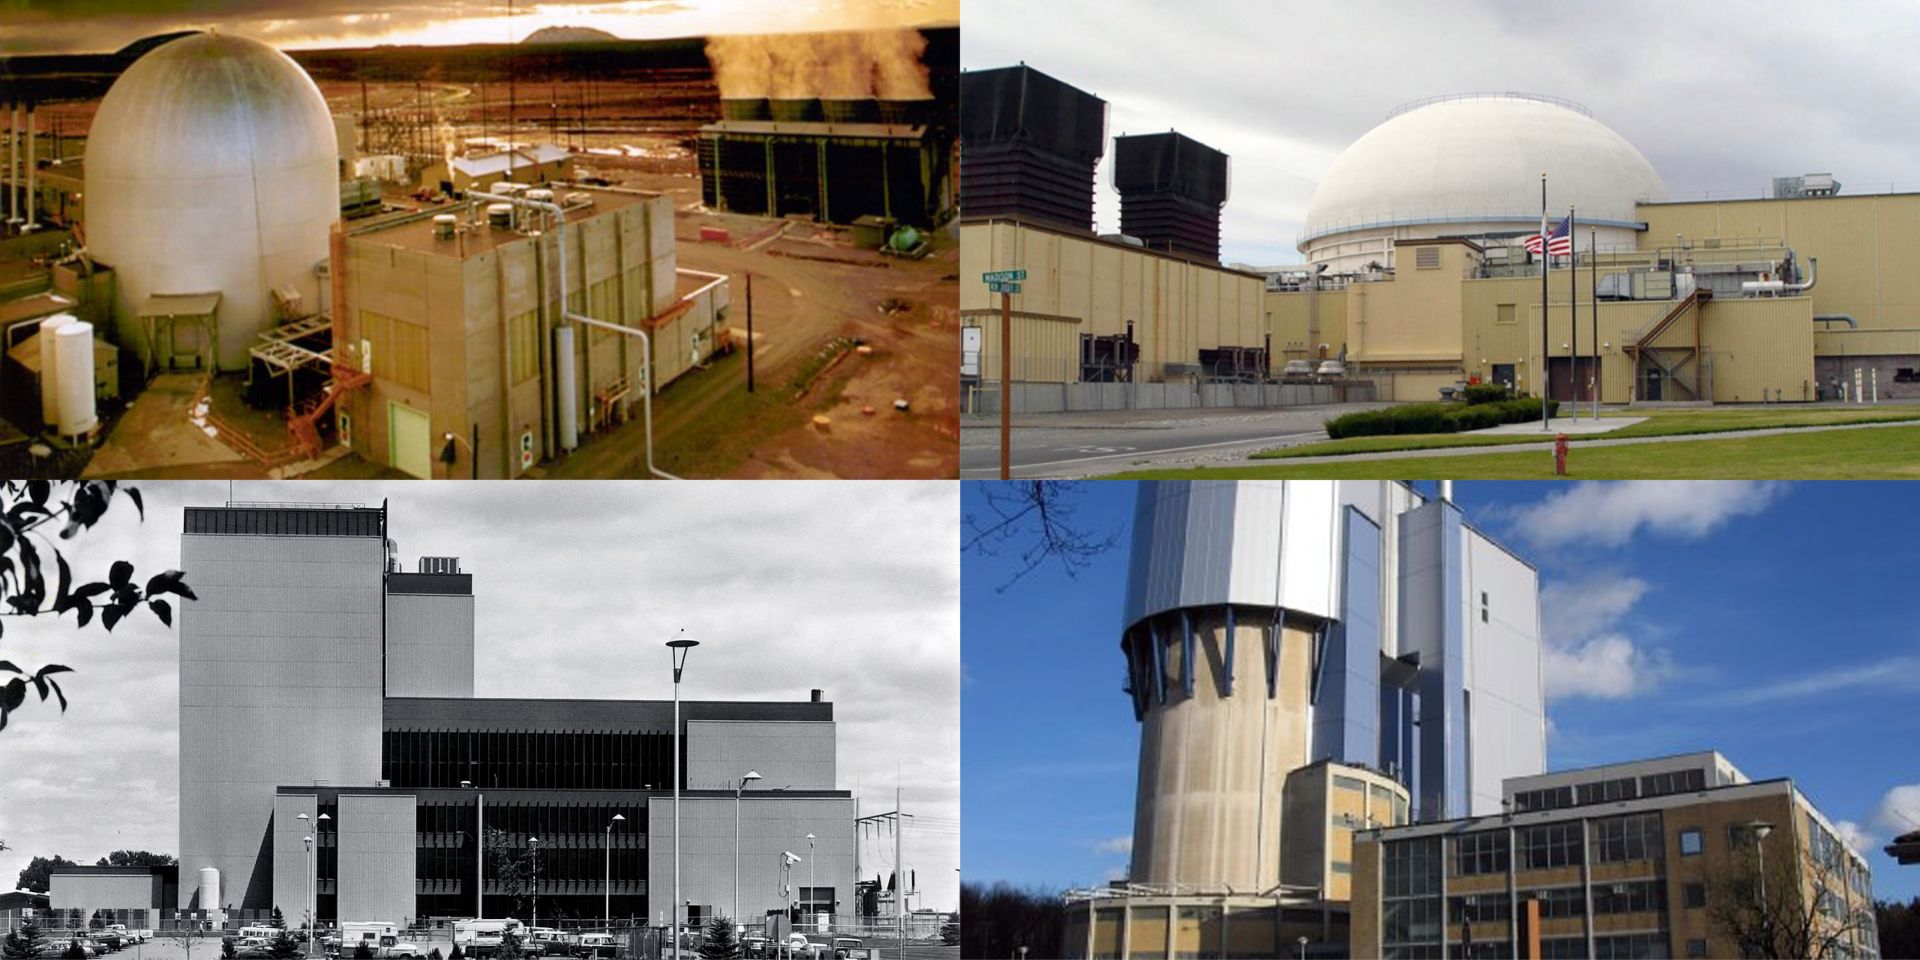 history of nuclear research